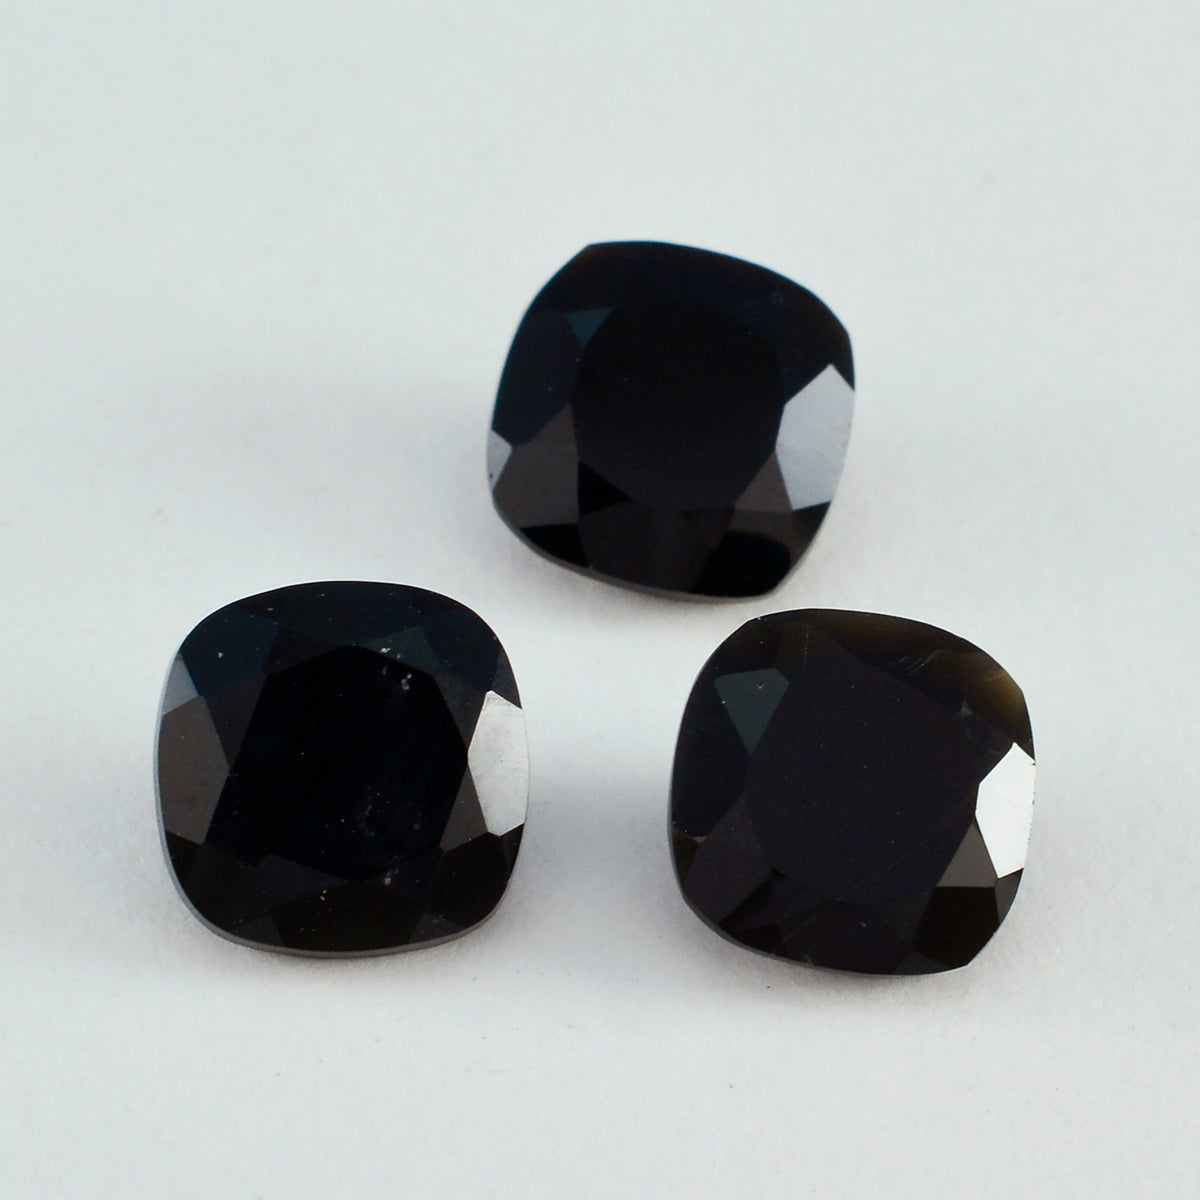 Riyogems 1PC Natural Black Onyx Faceted 9x9 mm Cushion Shape attractive Quality Loose Stone